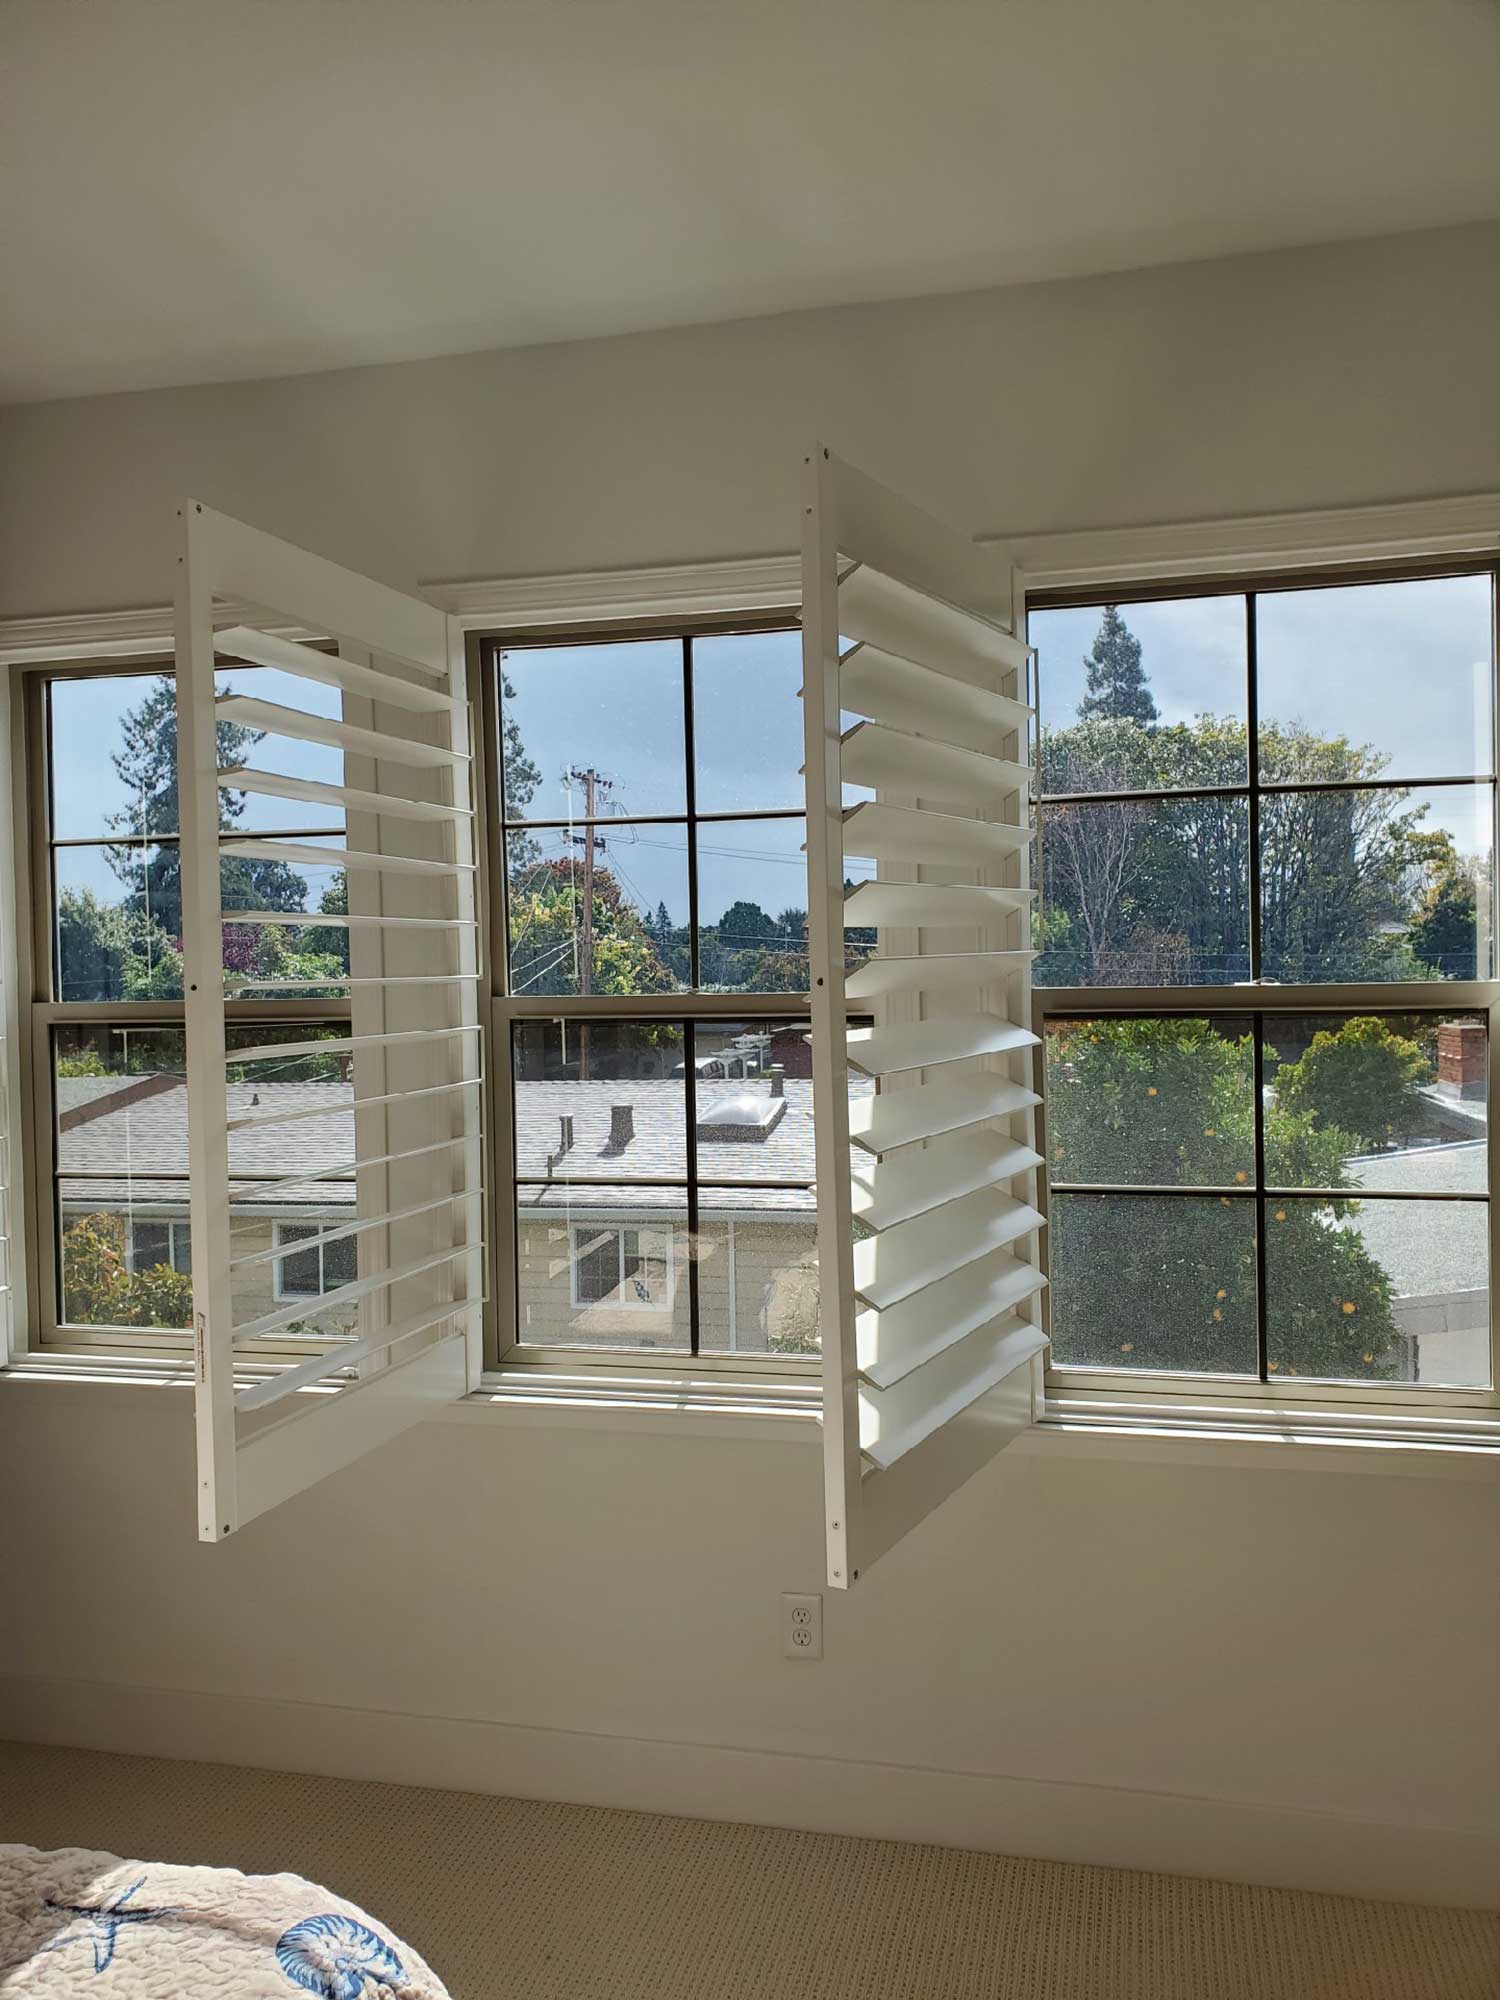 ClimatePro installed 3M Night Vision Window Film on this Sunnyvale, CA home.